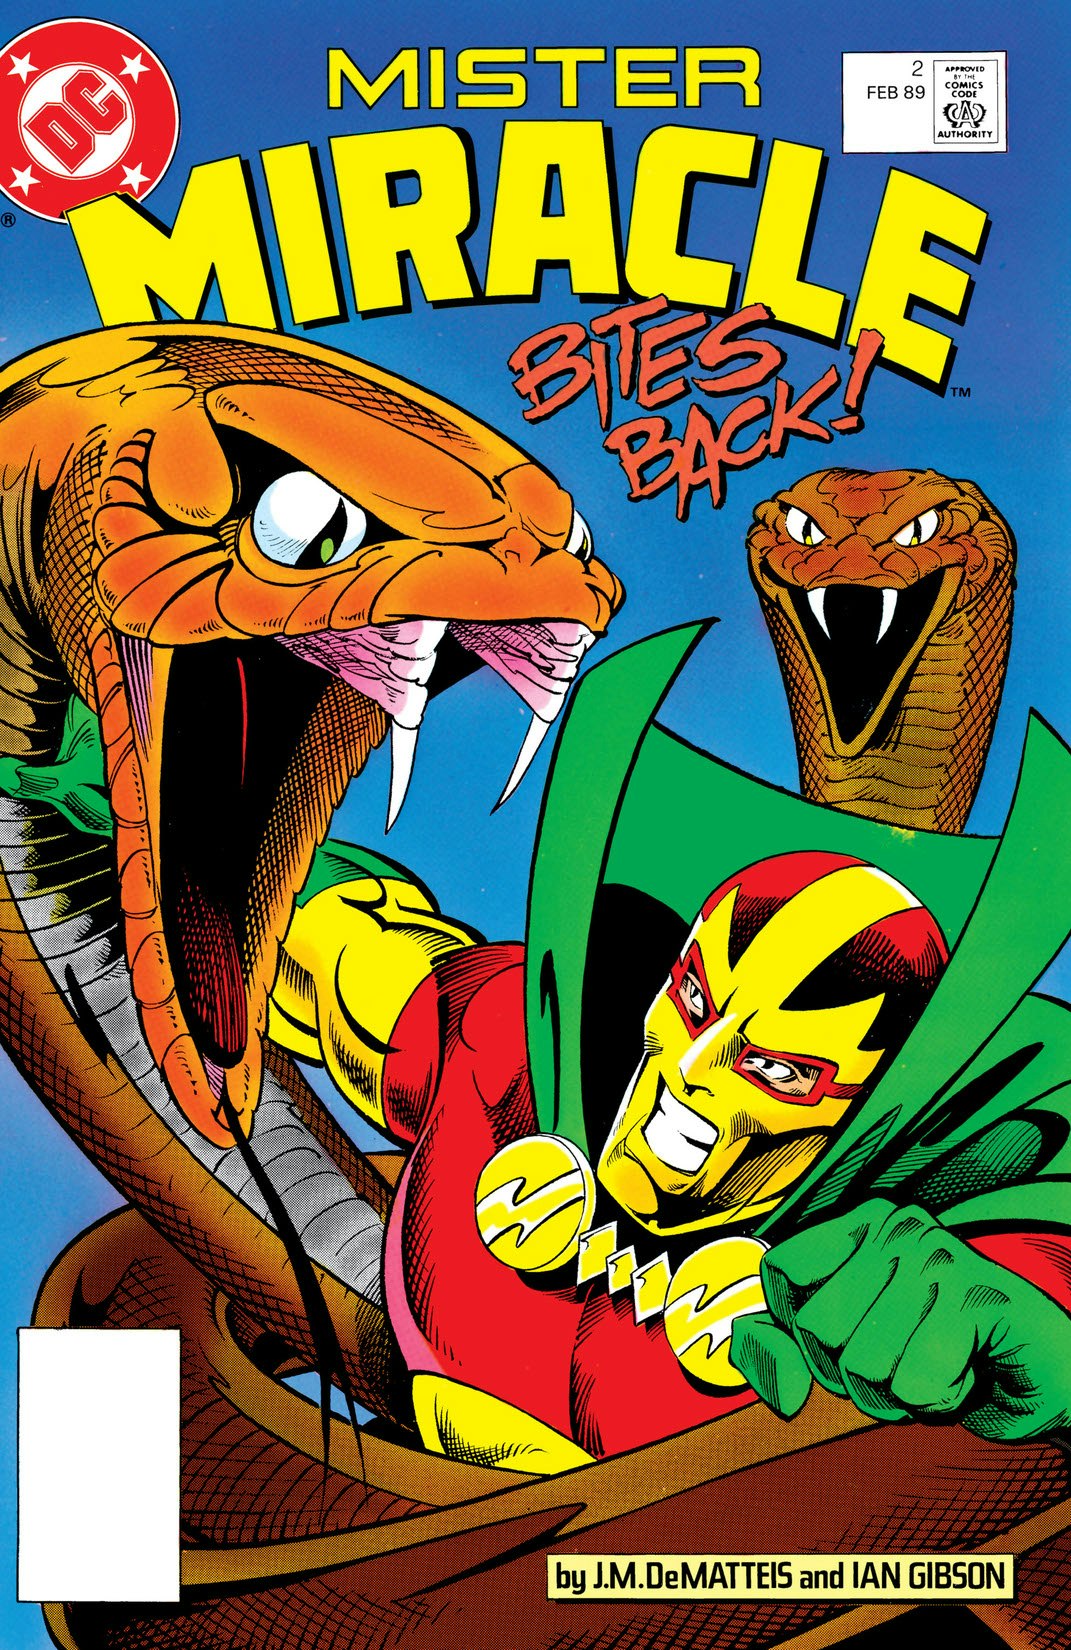 Mister Miracle #1 January 1989 DC Comics DeMatteis Gibson